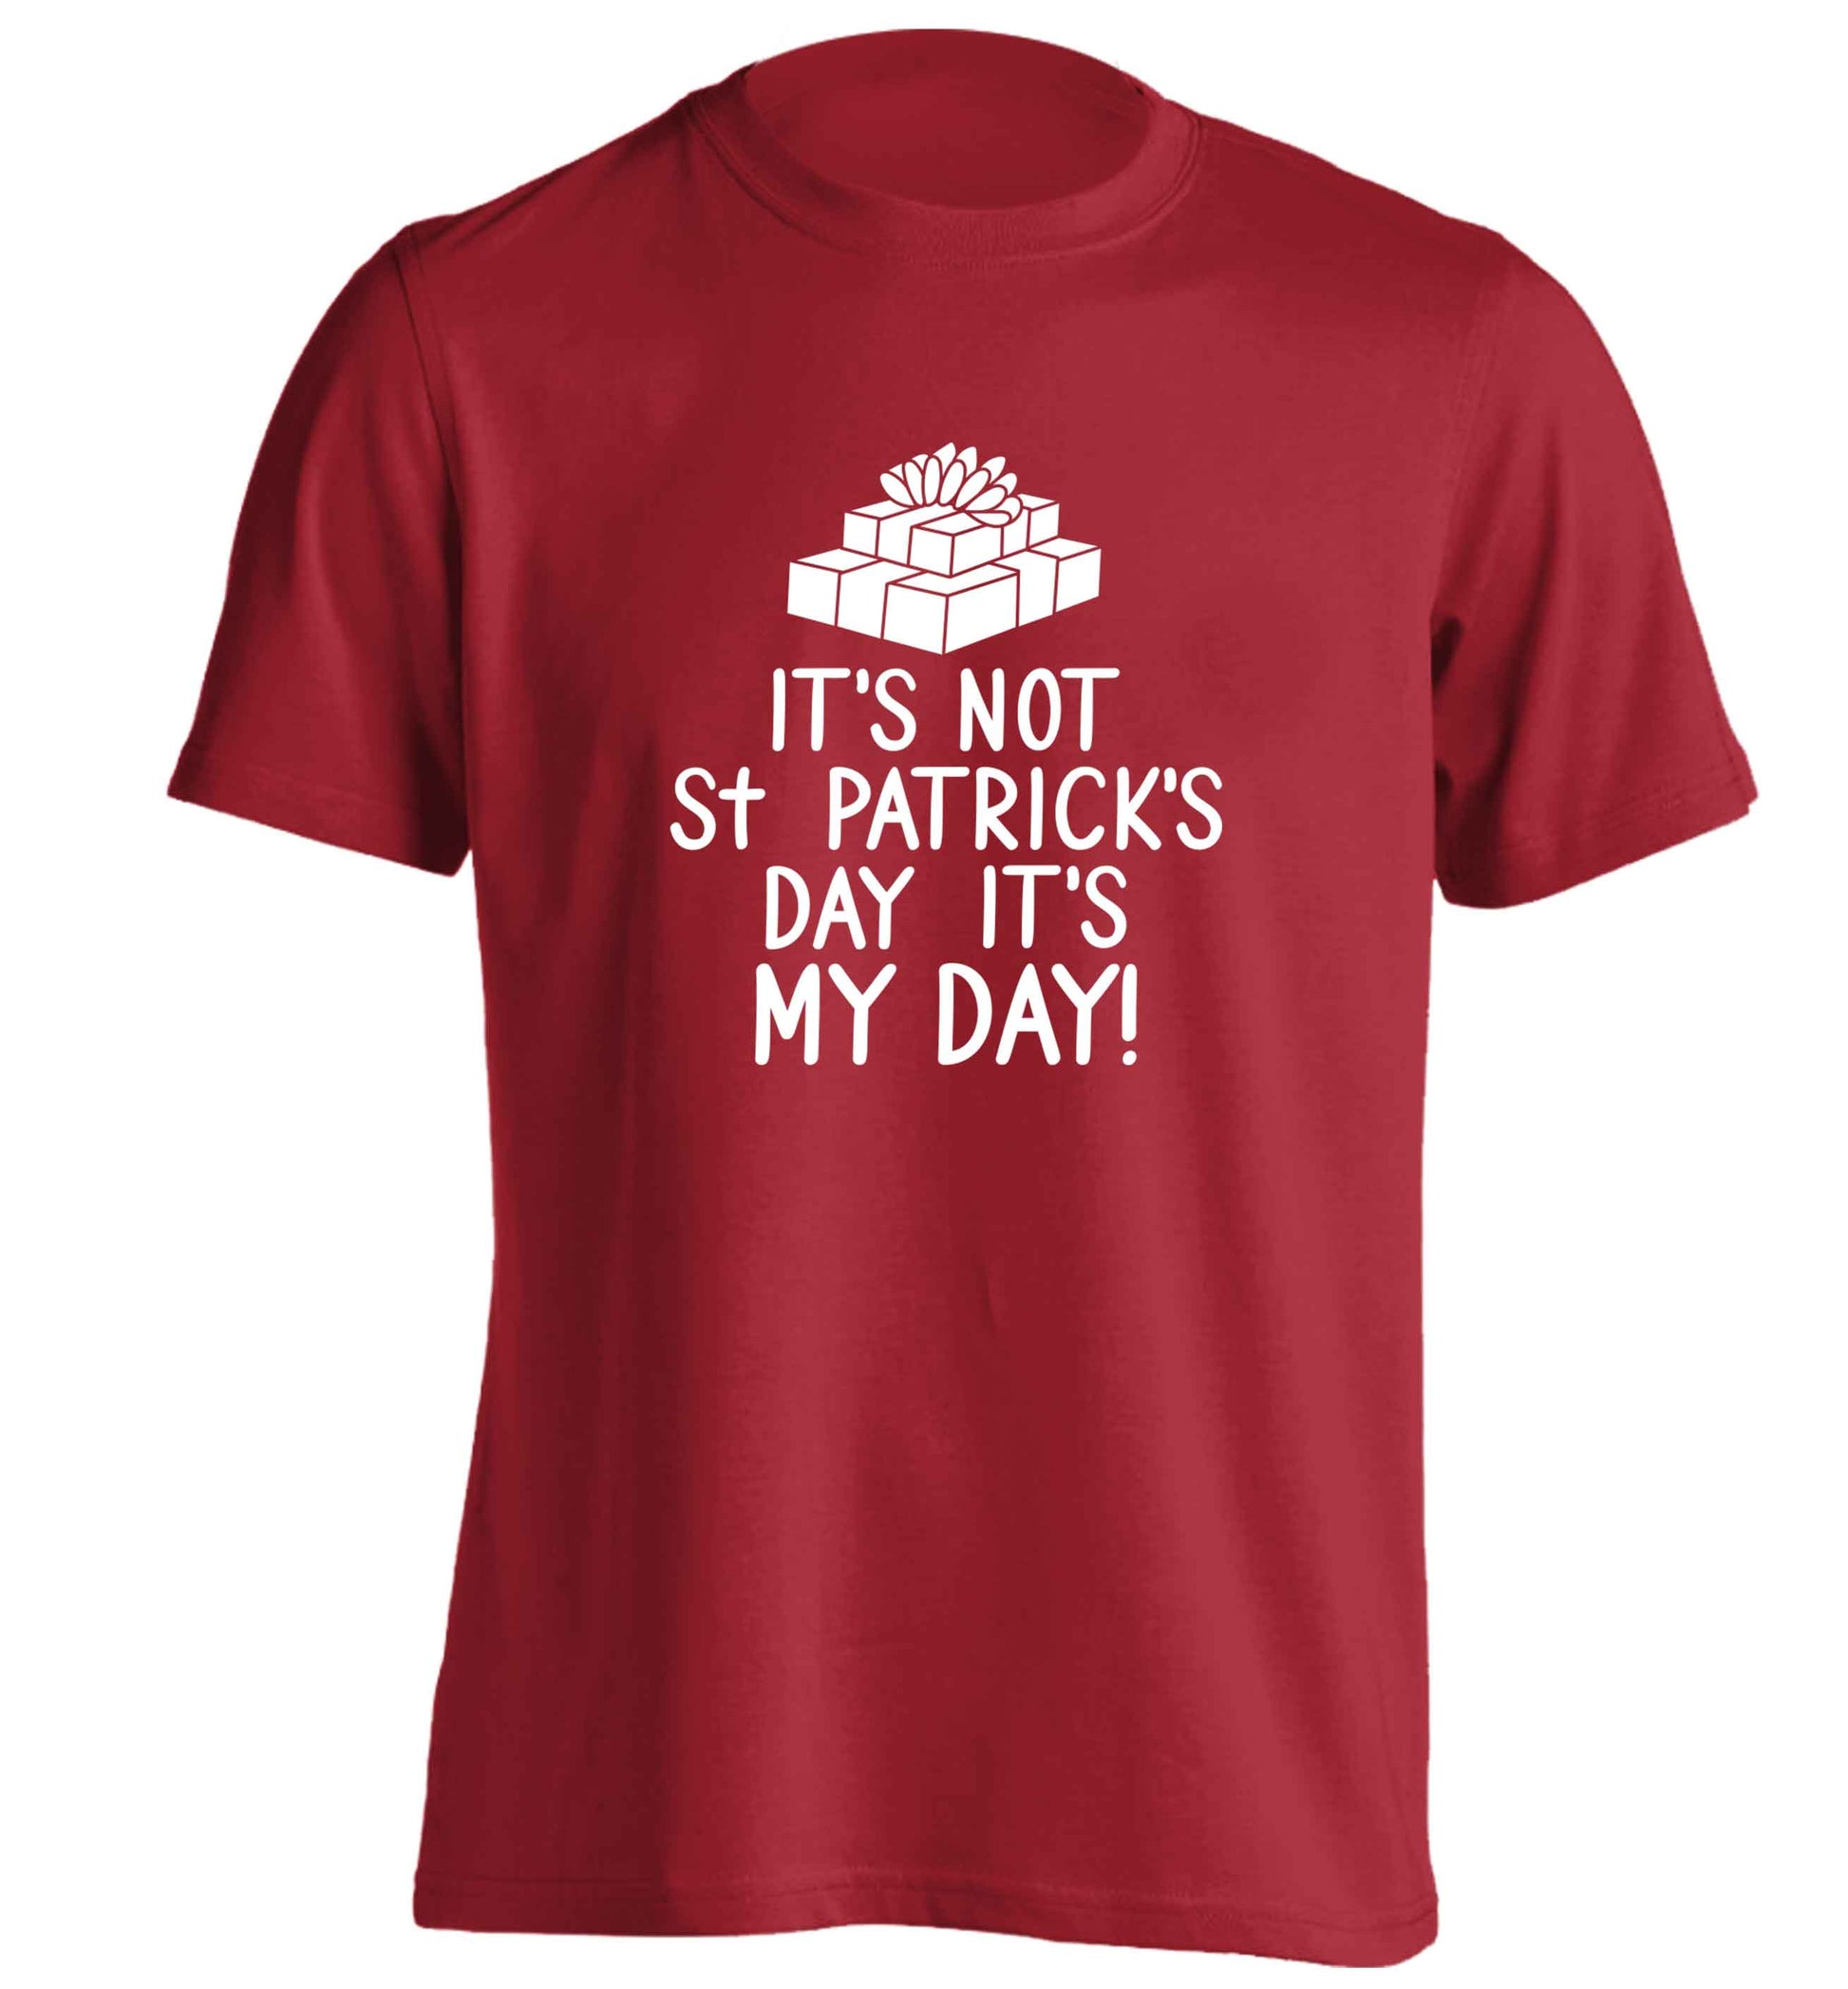 Funny gifts for your mum on mother's dayor her birthday! It's not St Patricks day it's my day adults unisex red Tshirt 2XL